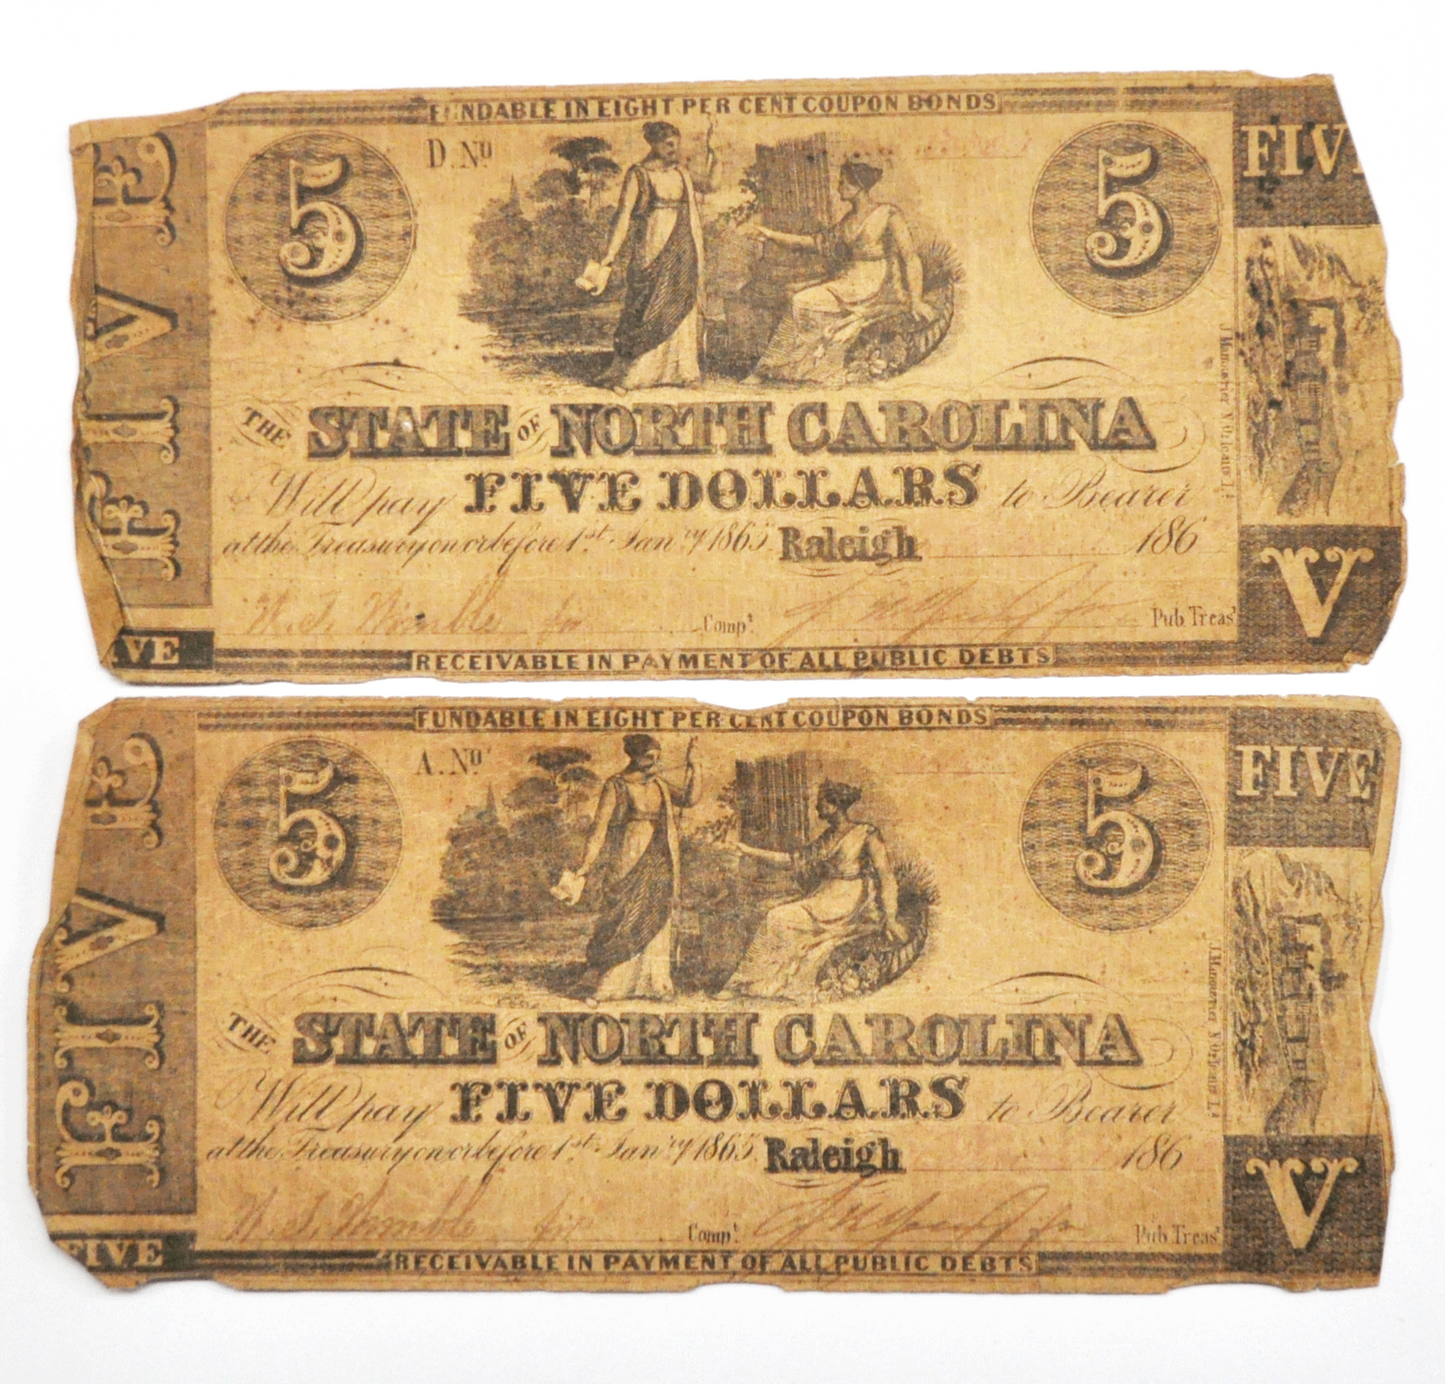 2- $5 State of North Carolina Obsolete Notes Five Dollars Raleigh